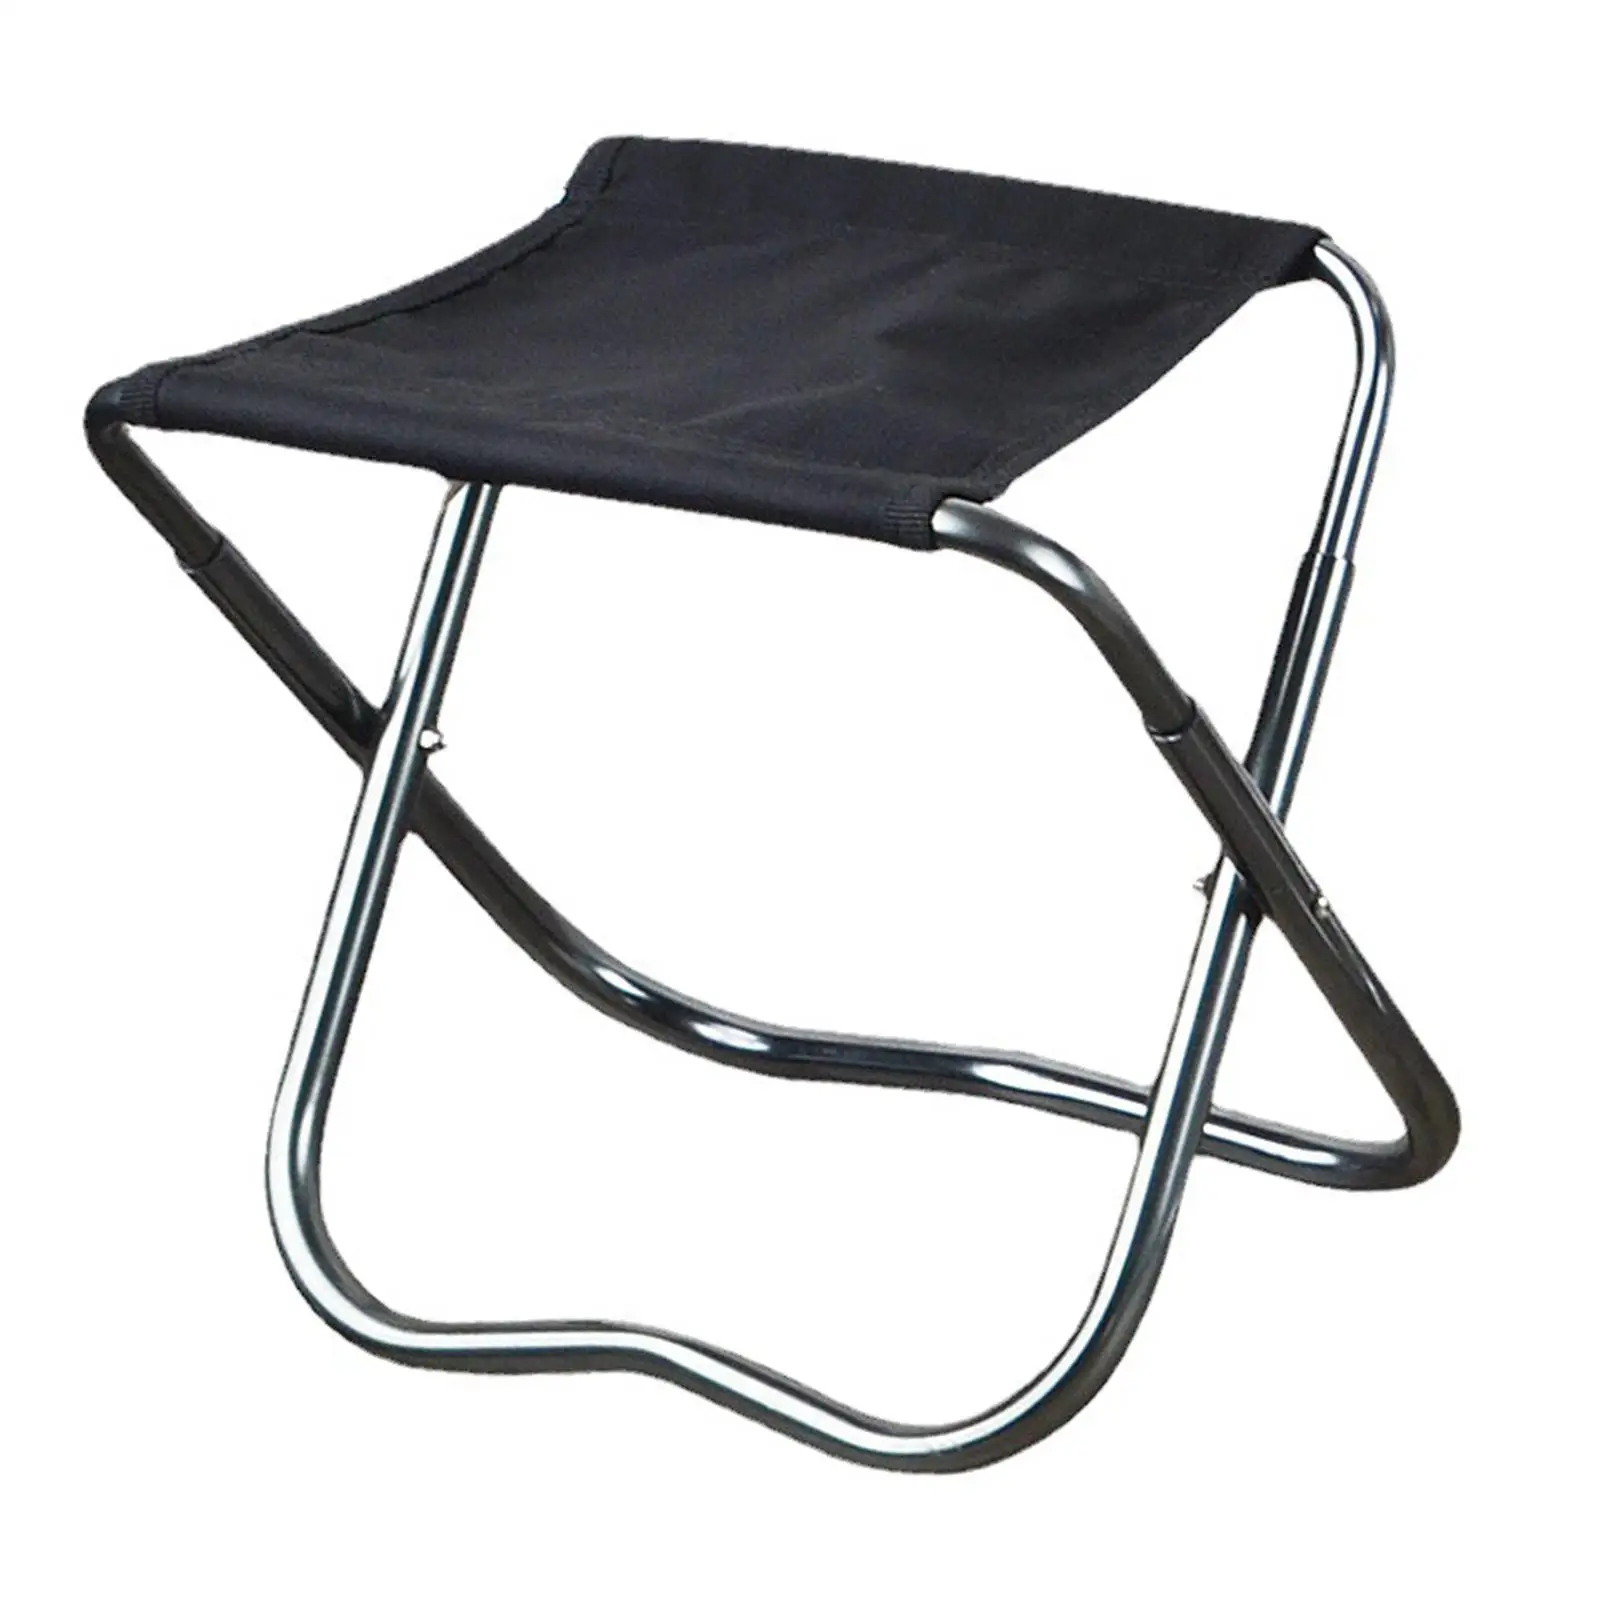 Camping Chair Outdoor Foldable Durable Easy to Carry Portable Folding Stool Fishing Seat for BBQ Barbecue Picnic Lawn Fishing